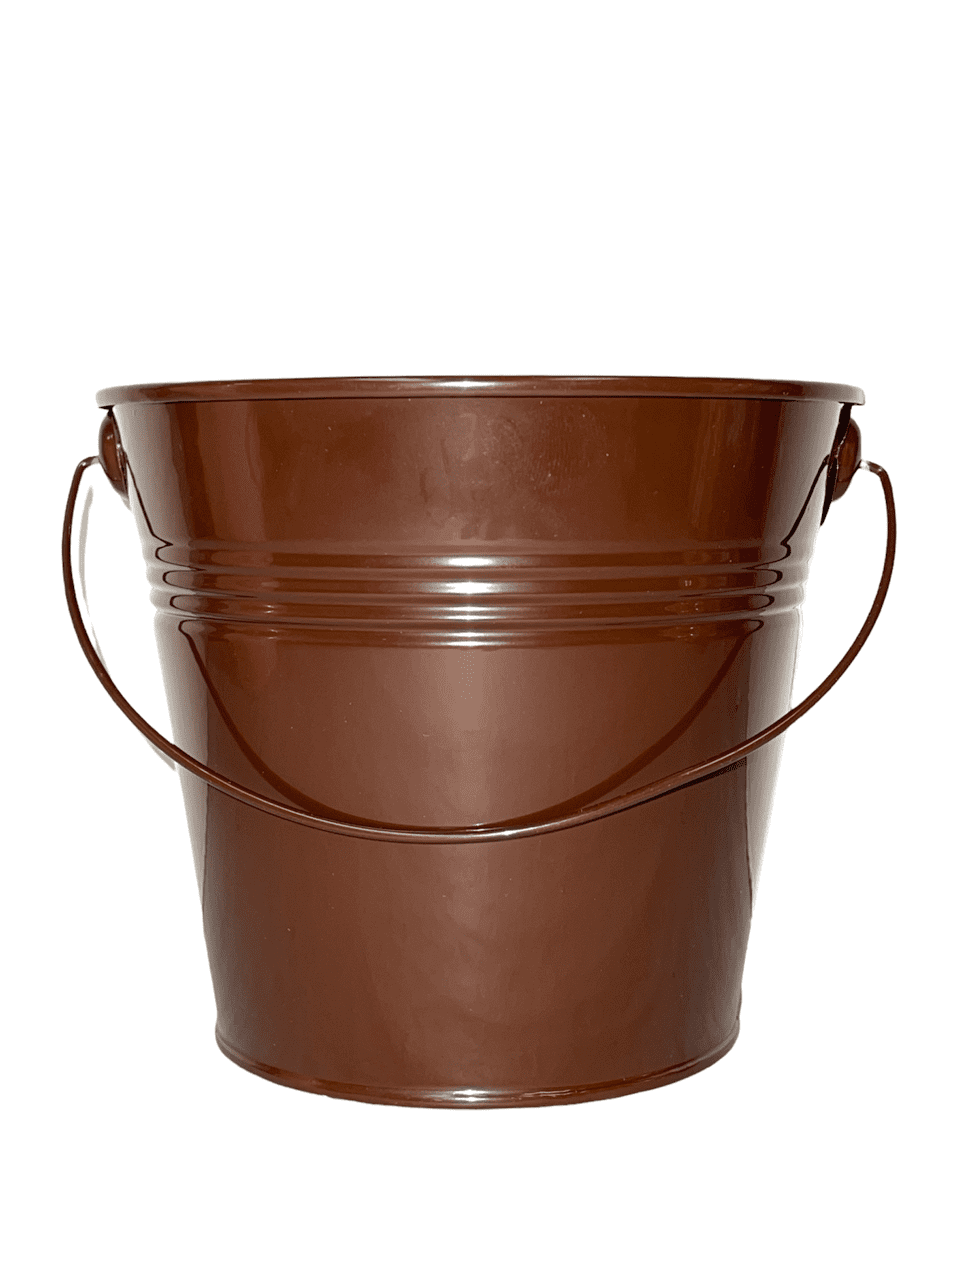 Colored Mini Metal Buckets - 3-Pack Colorful Tin Pails with Handles, Small-Sized for The Beach, Party Favors, Easter, Candy, or Garden; 5.25 inchx3.75